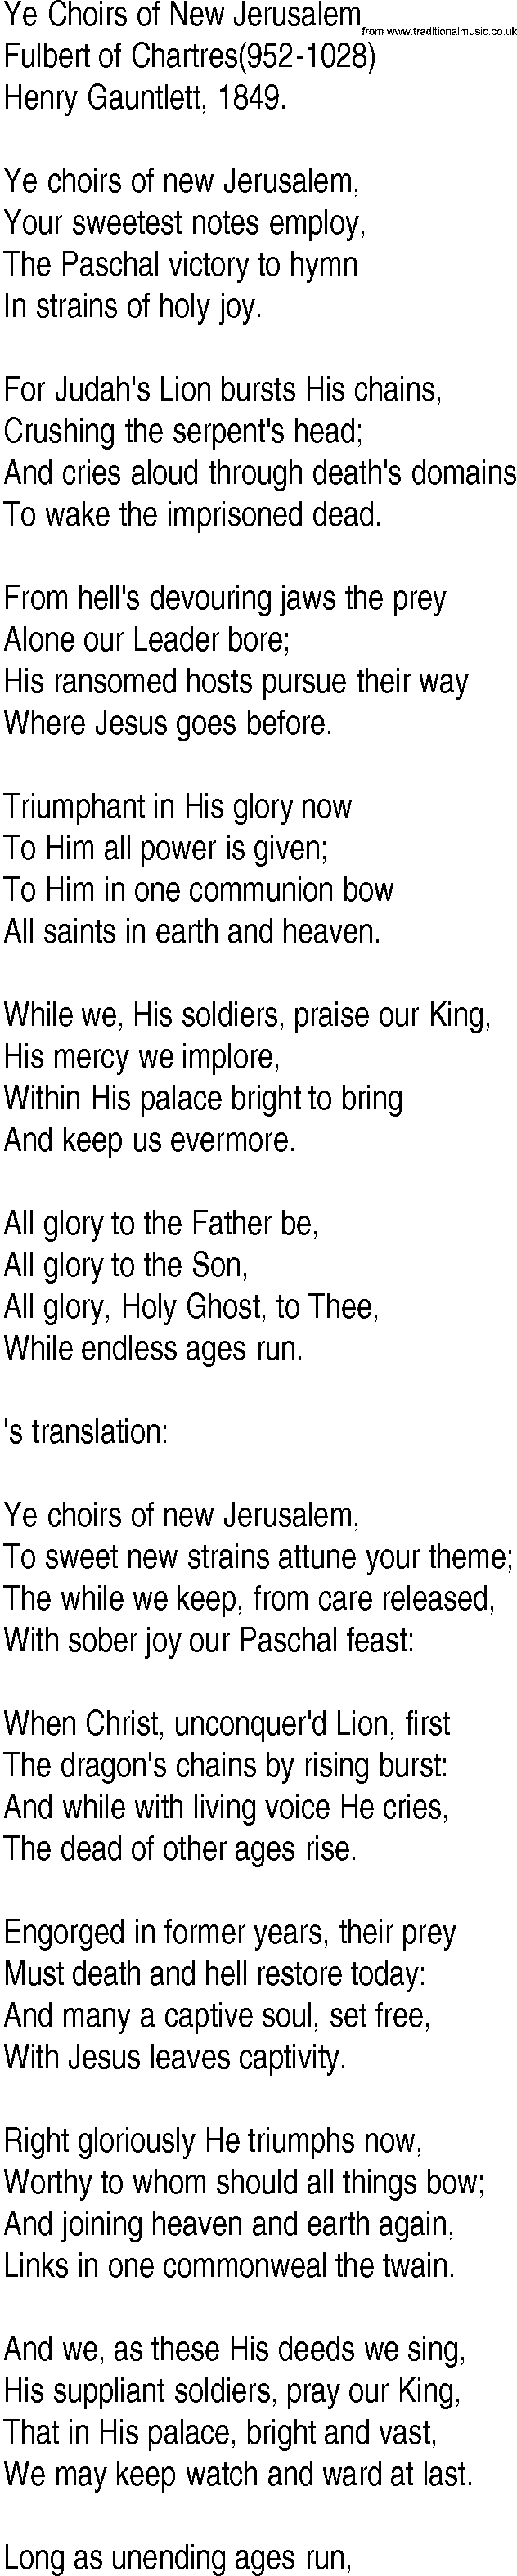 Hymn and Gospel Song: Ye Choirs of New Jerusalem by Fulbert of Chartres lyrics